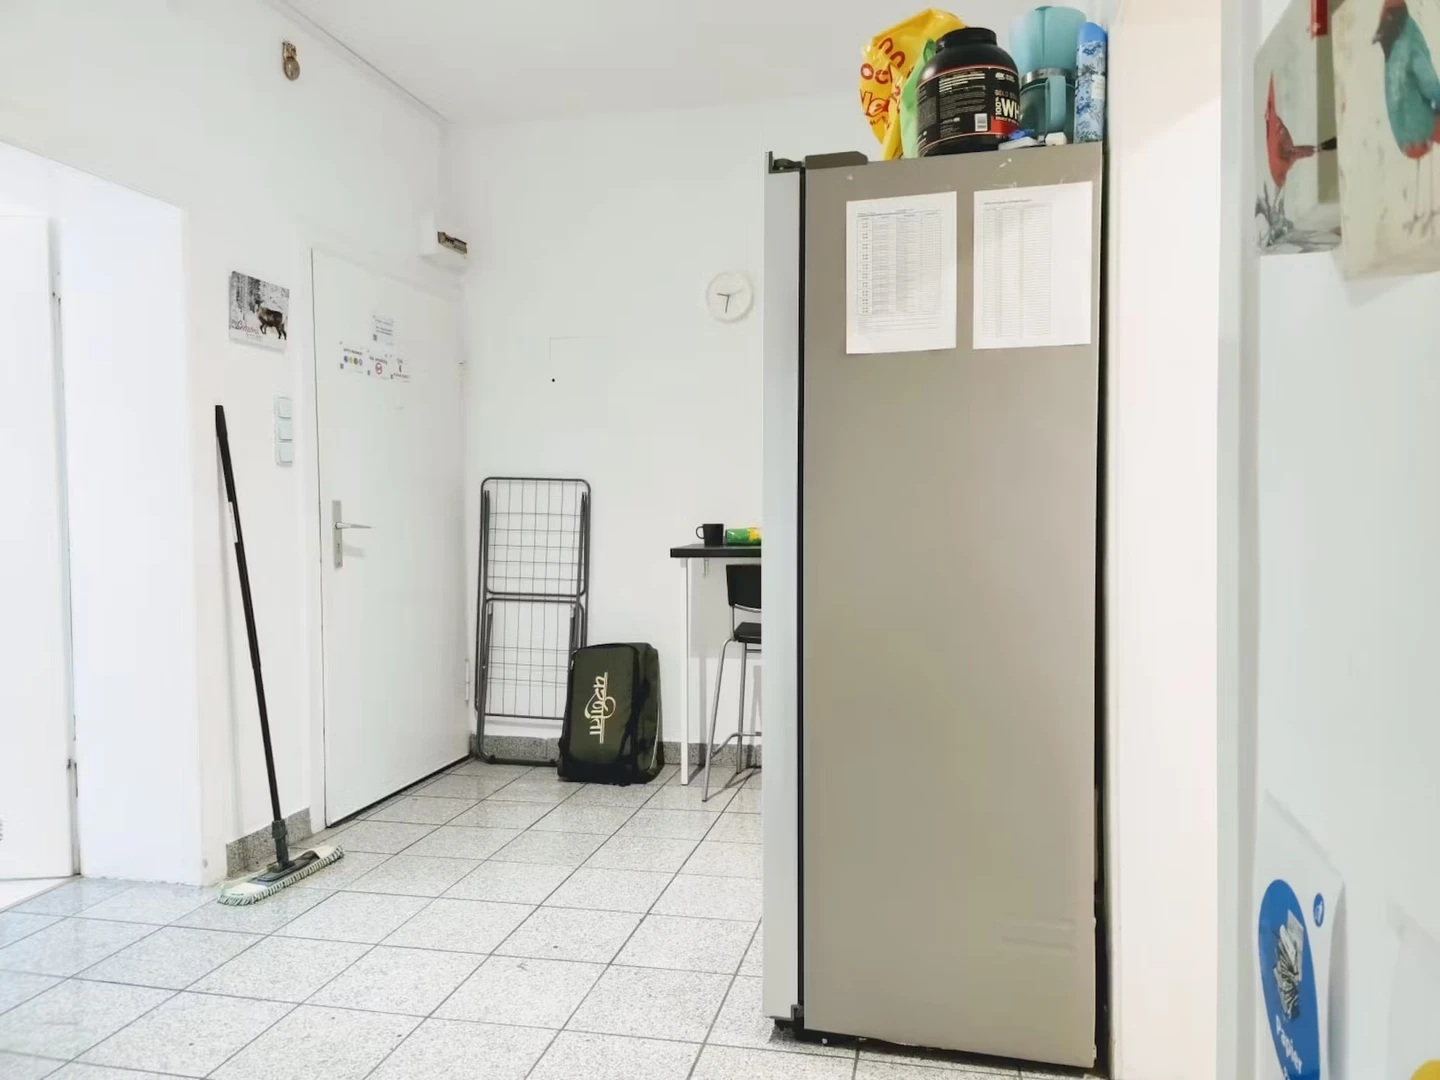 Room for rent in a shared flat in Dortmund